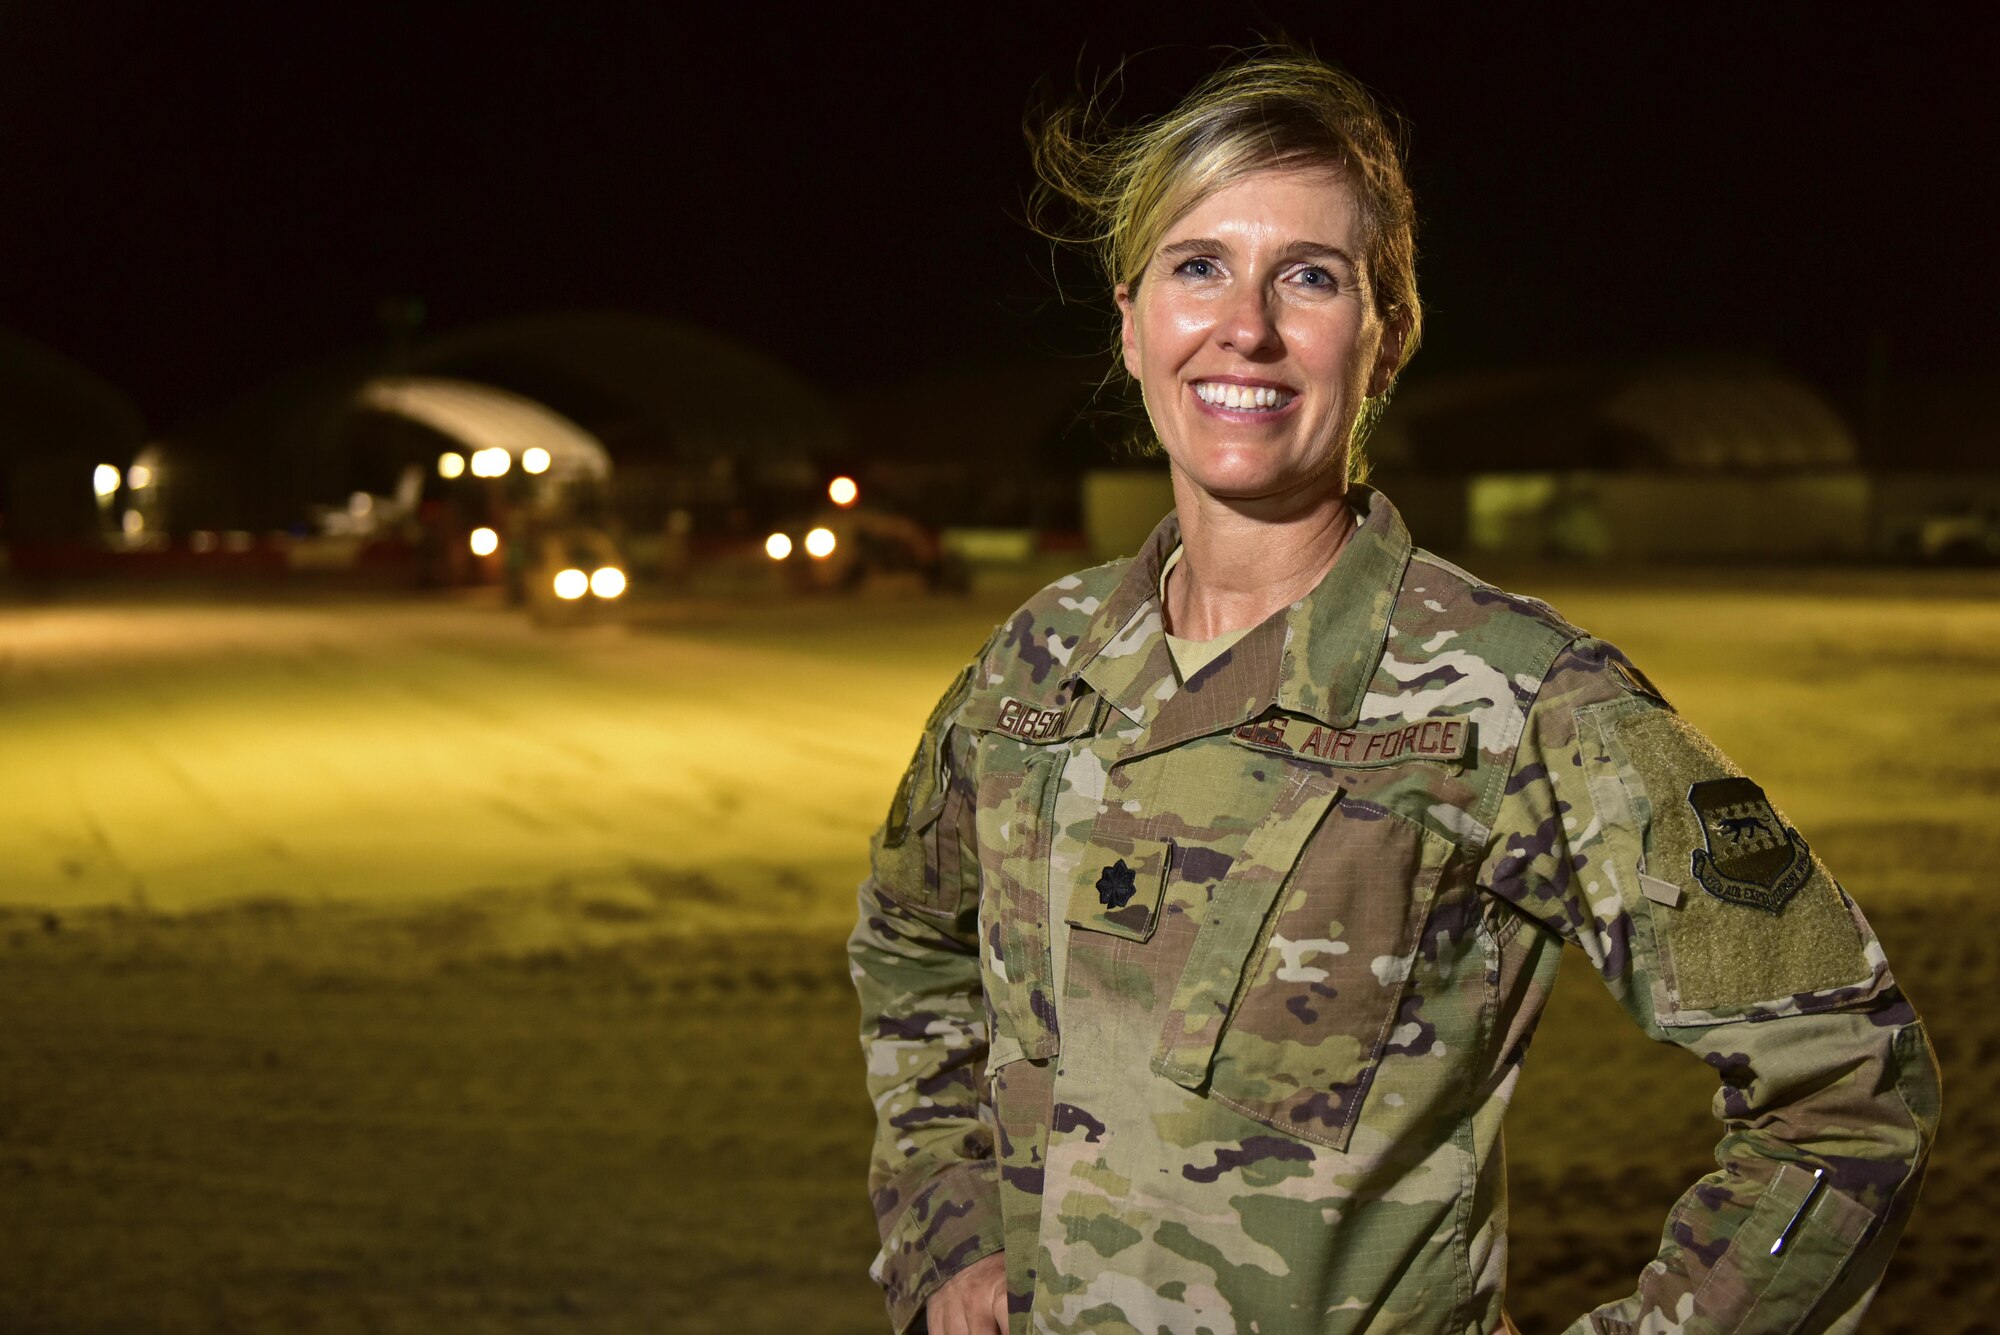 Lt. Col. Heidi Gibson, 407th Expeditionary Civil Engineer Squadron commander, poses for a photo June 7, 2017, at the 407th Air Expeditionary Group in Southwest Asia. Gibson enlisted in the California Air National Guard in 1986 then later commissioned. She has had success in her civilian and military career, holding the titles of principal in her very own architecture firm and field grade officer with the Air National Guard as the 163rd Civil Engineer Squadron commander at March Air Reserve Base, Calif. (U.S. Air force photo by Senior Airman Ramon A. Adelan)